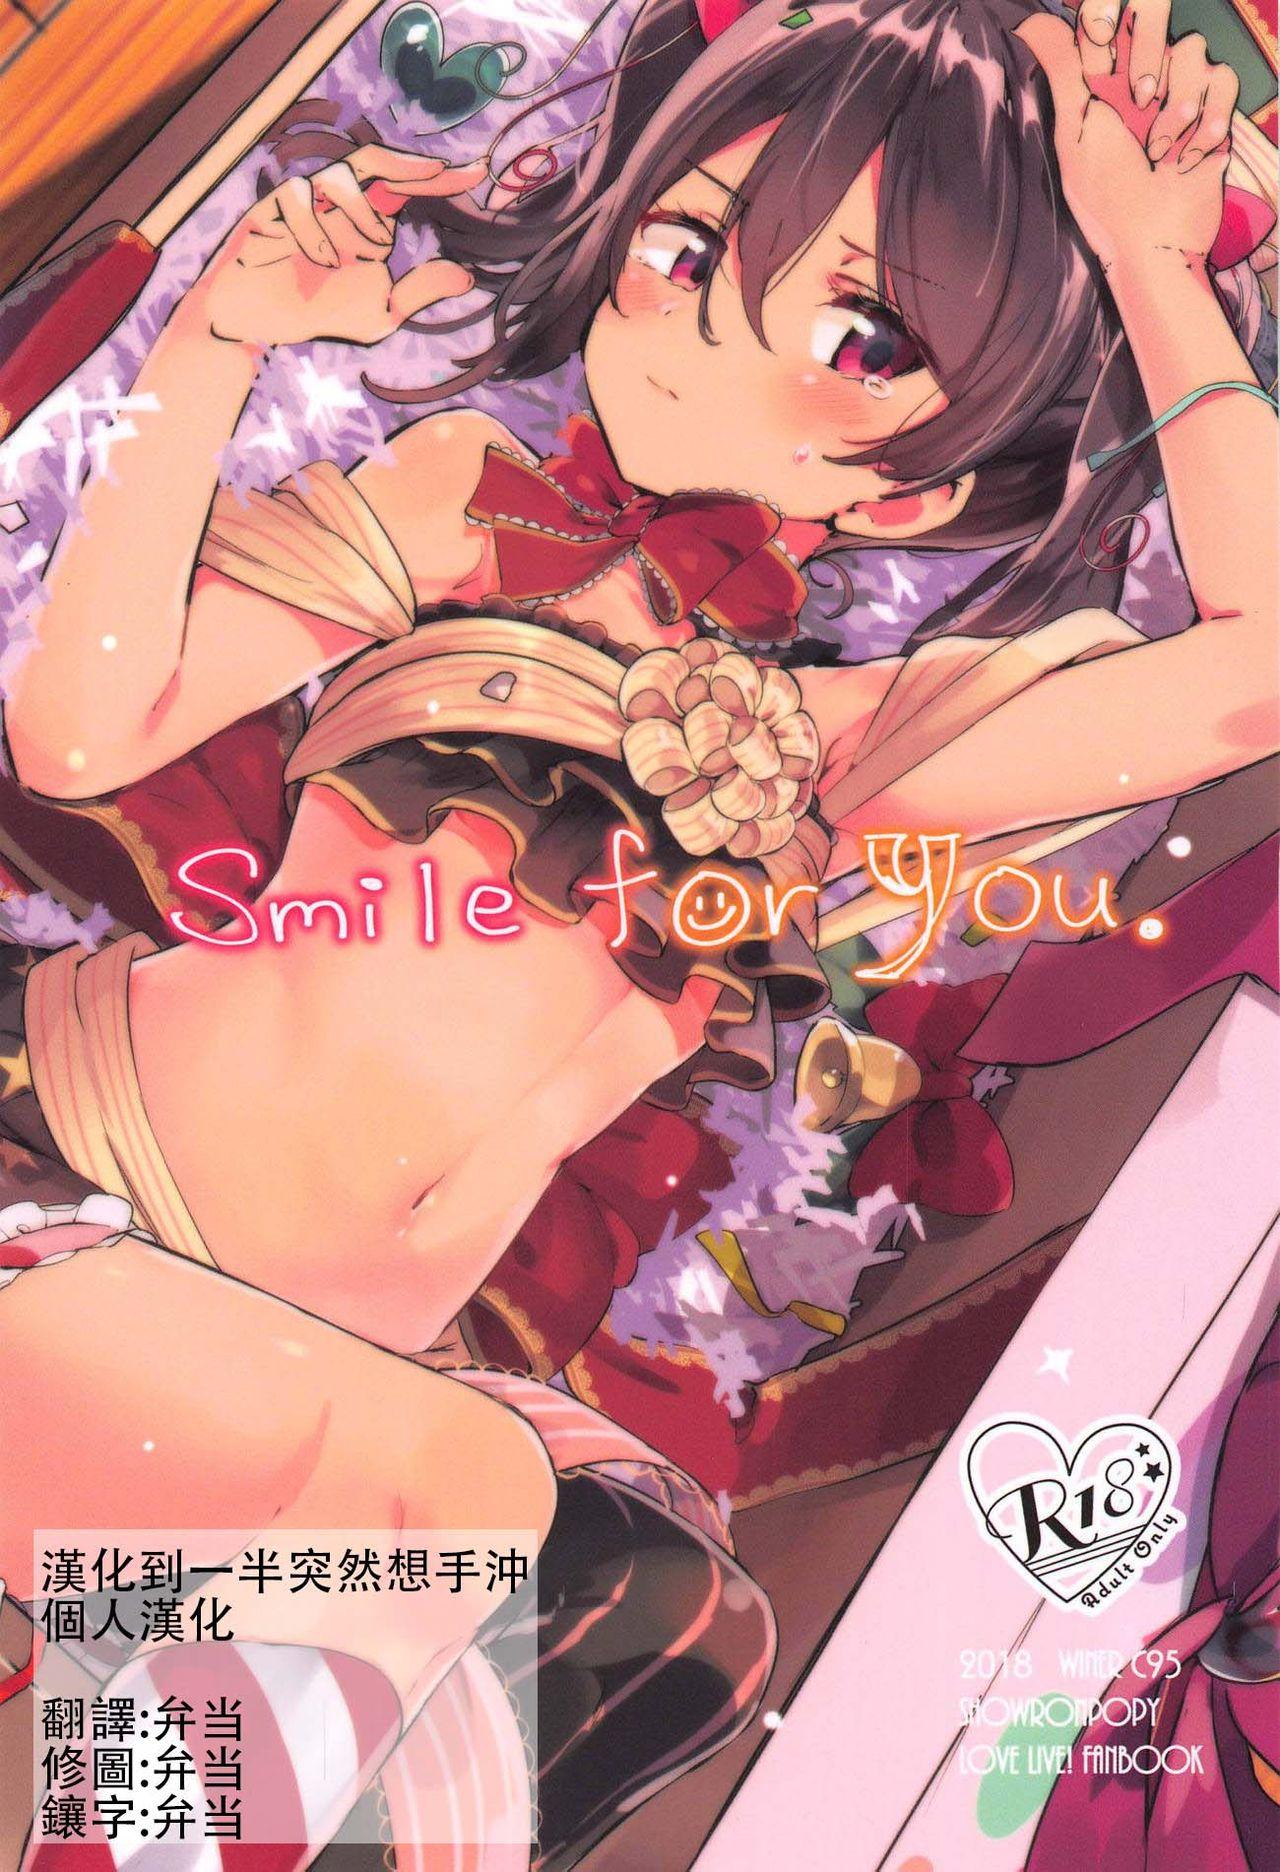 Scandal Smile for you. - Love live Gay Pawnshop - Page 1